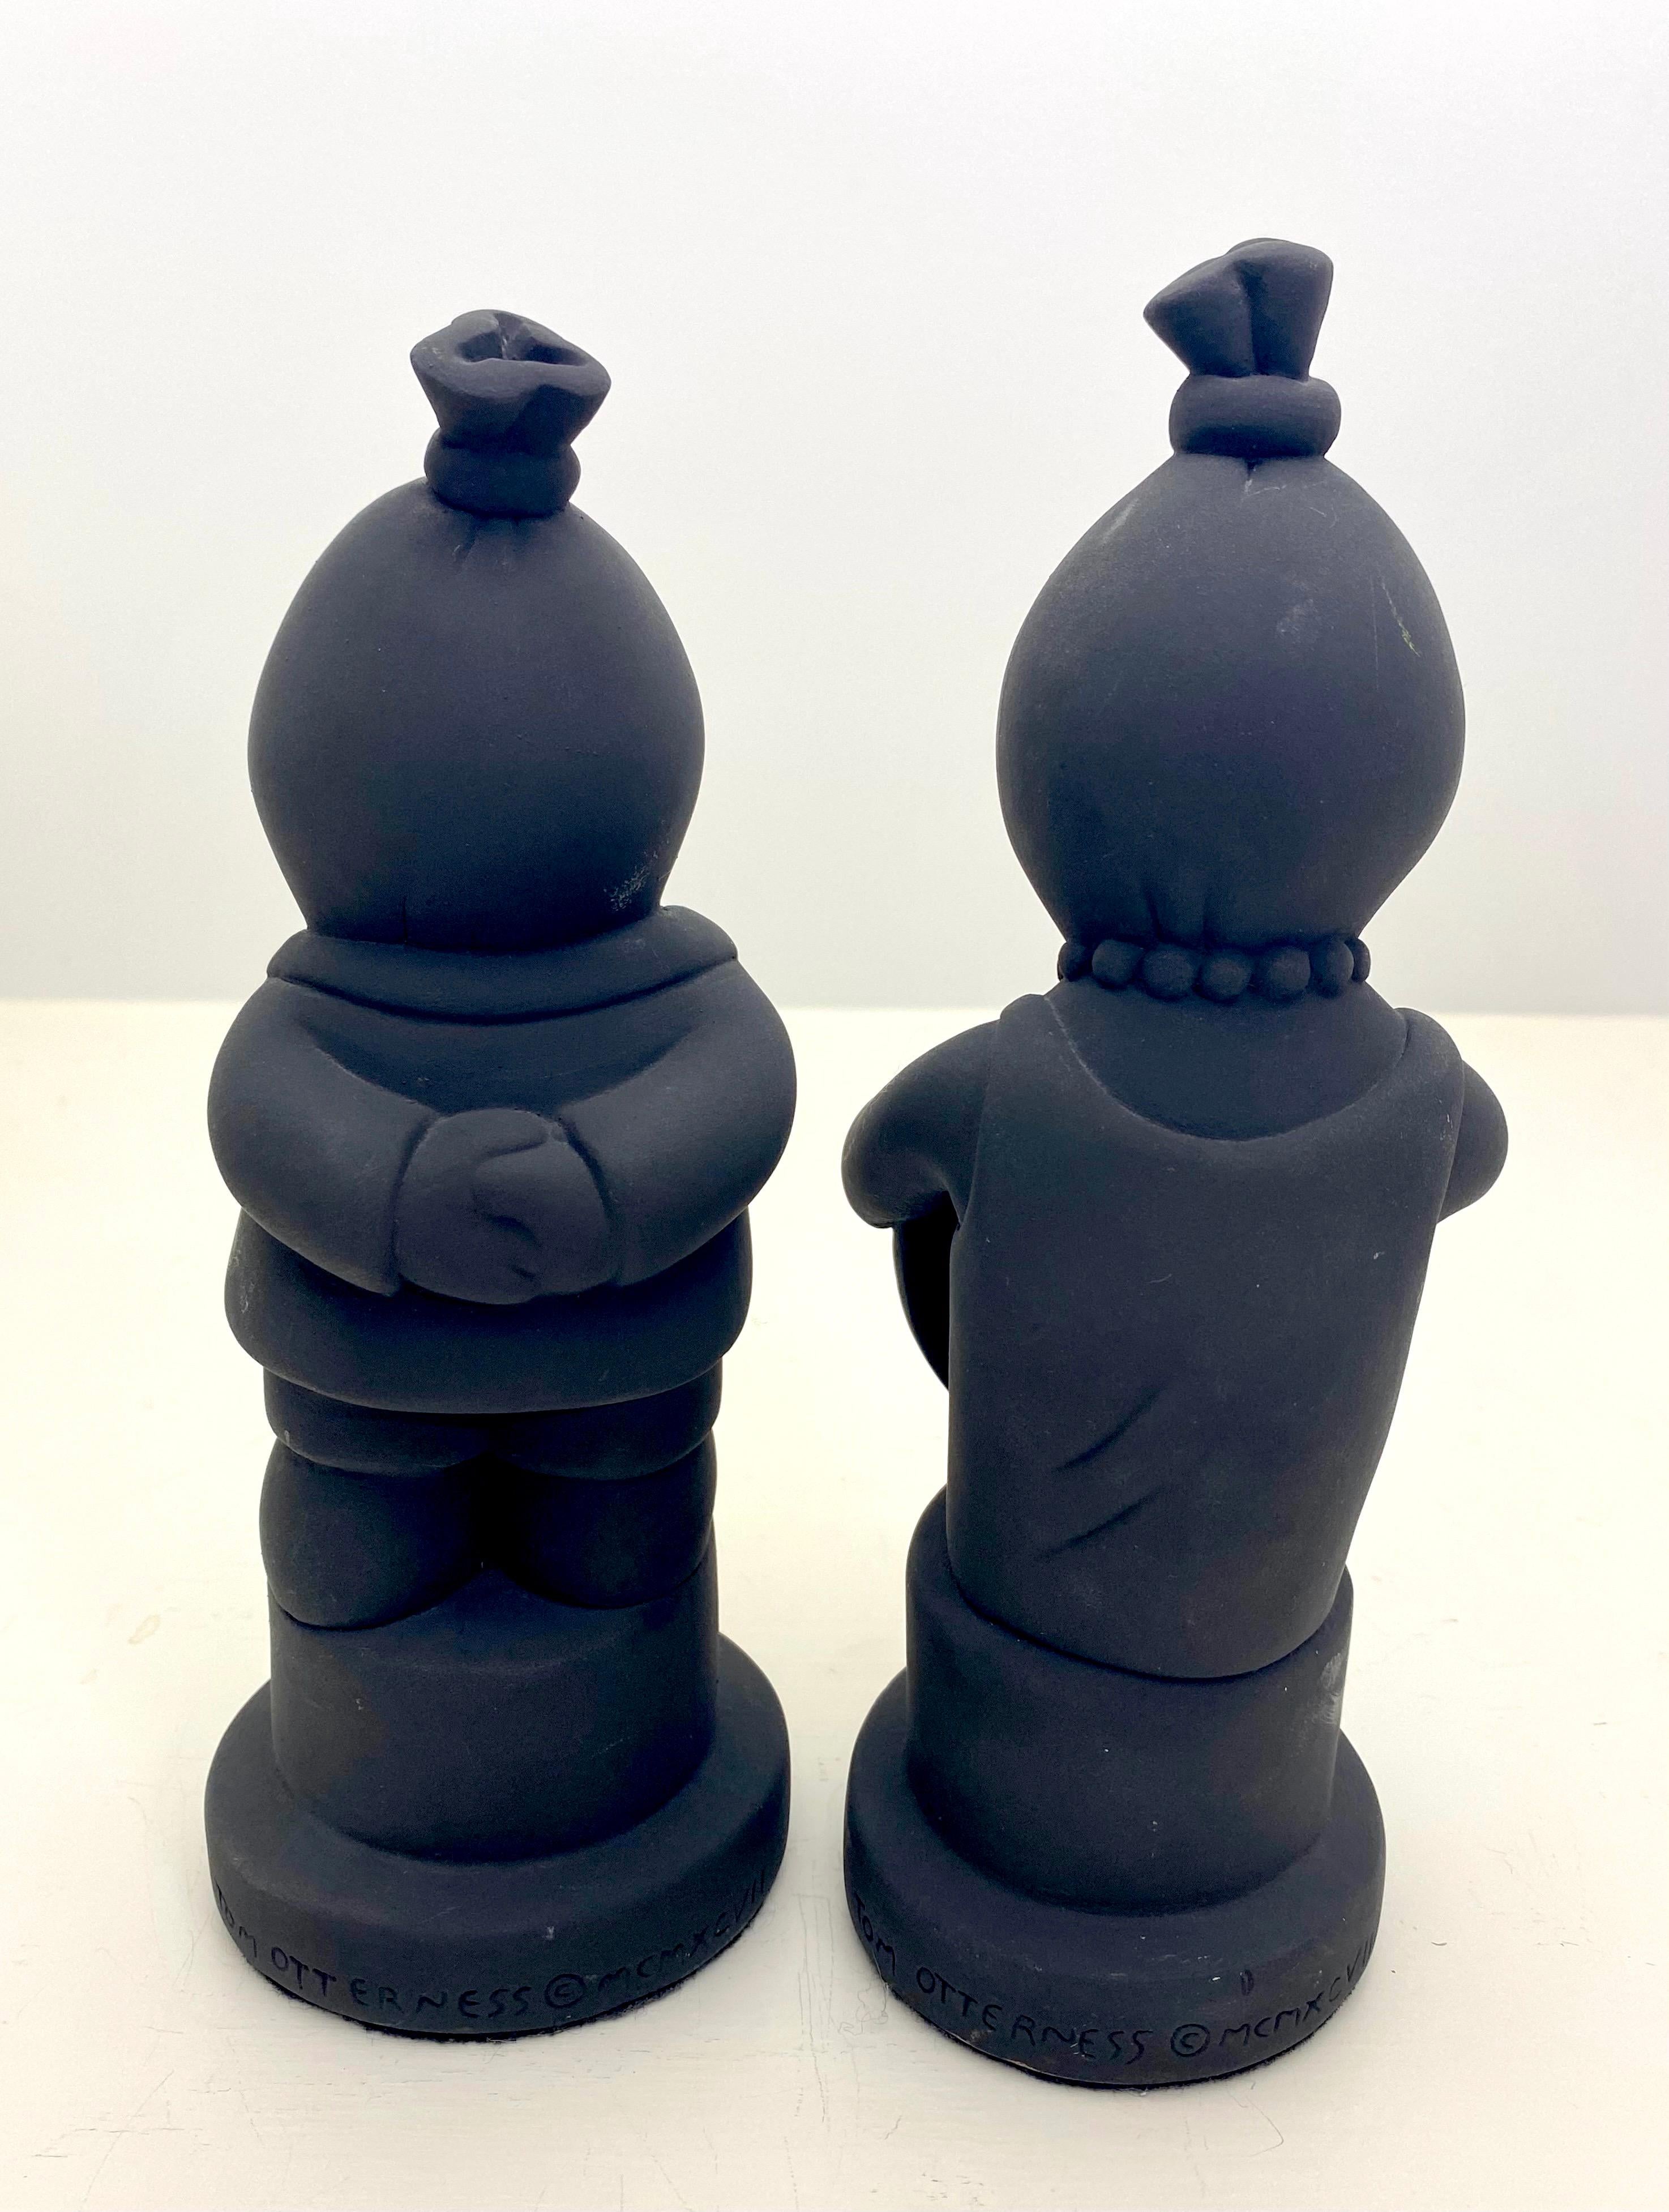 North American Tom Otterness King and Queen Plaster Sculptures